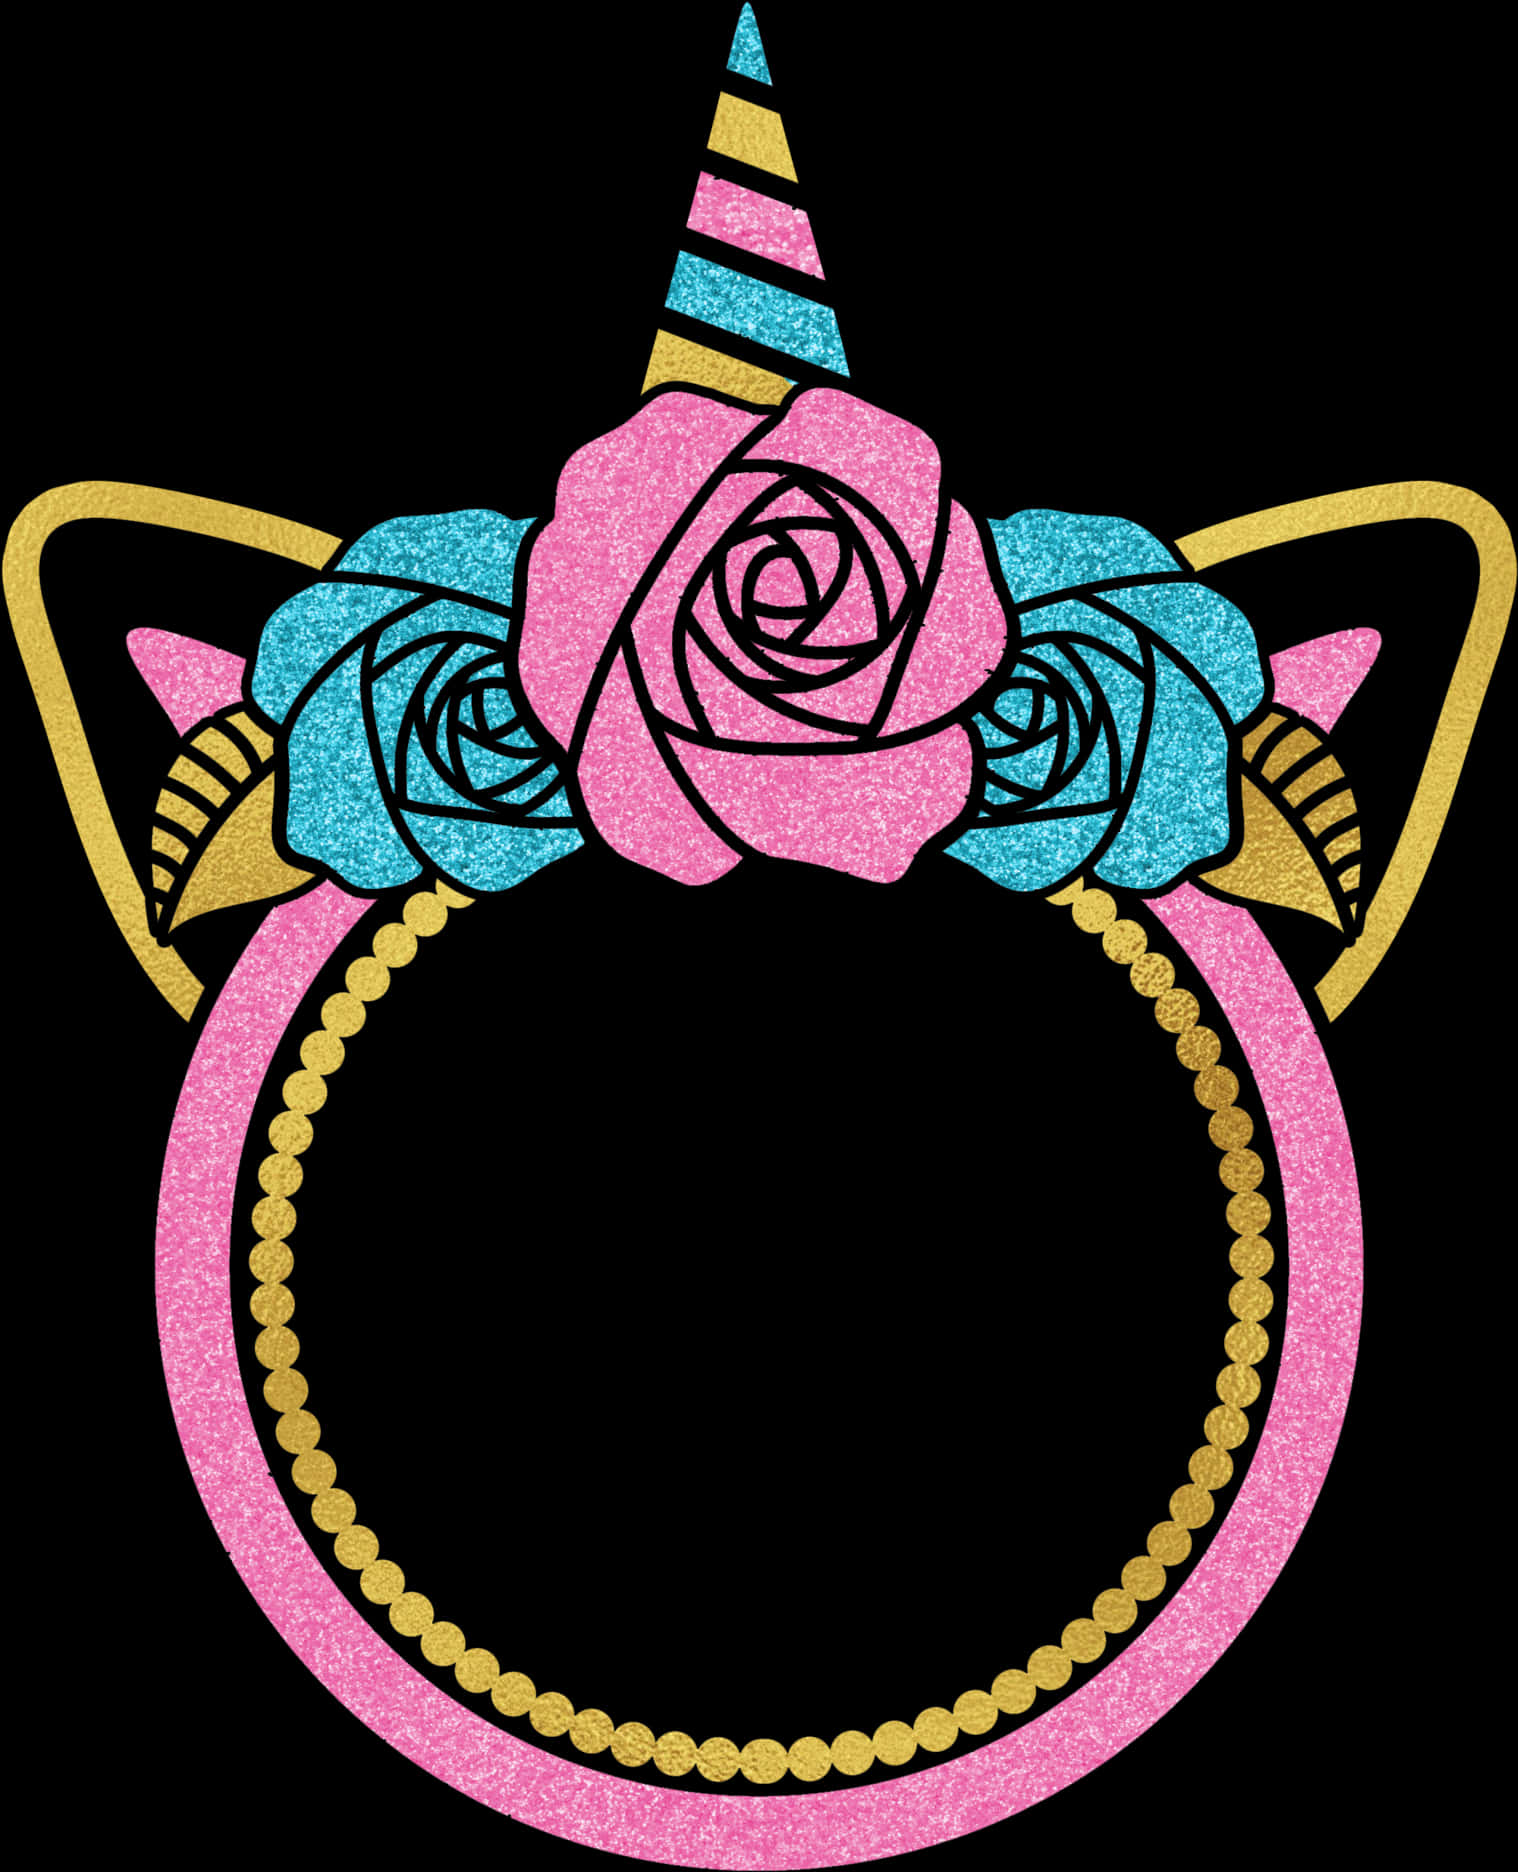 A Unicorn Headband With A Horn And Flowers